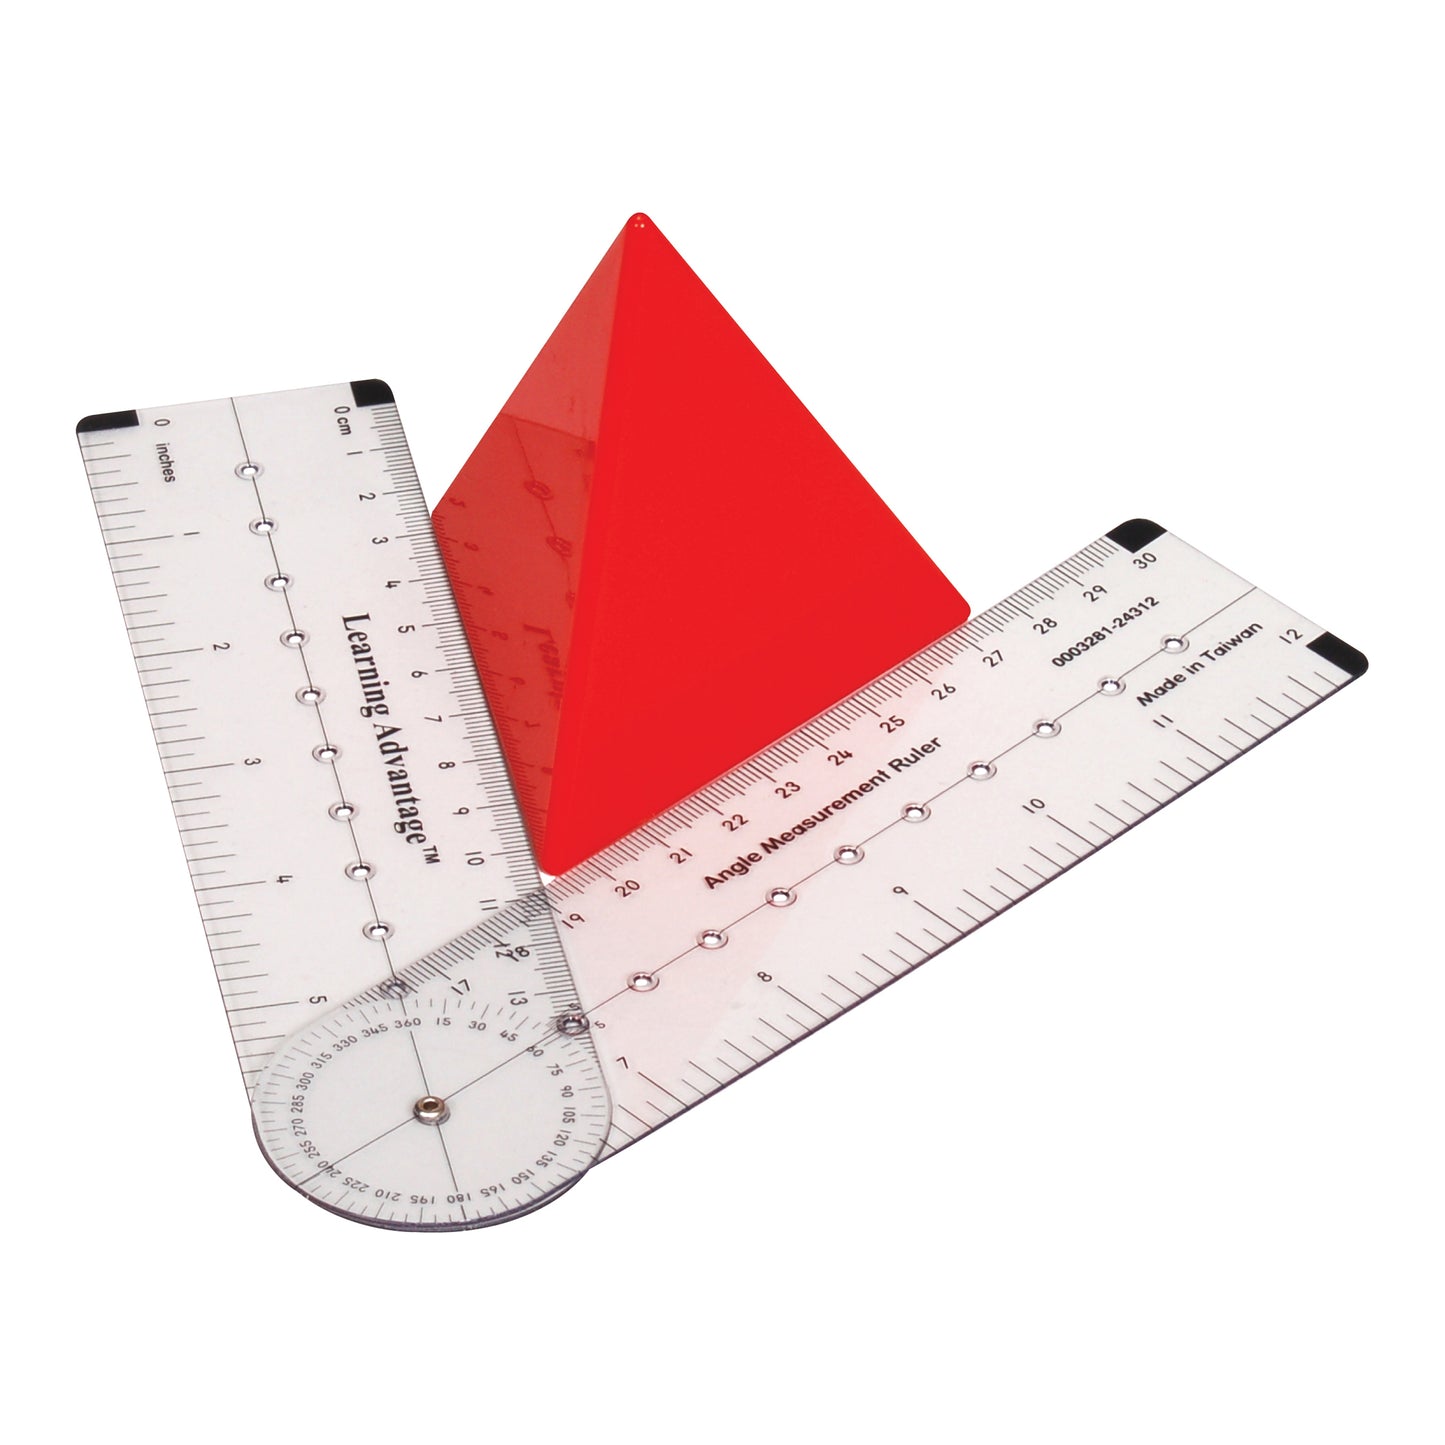 Angle Measurement Ruler, Pack of 6